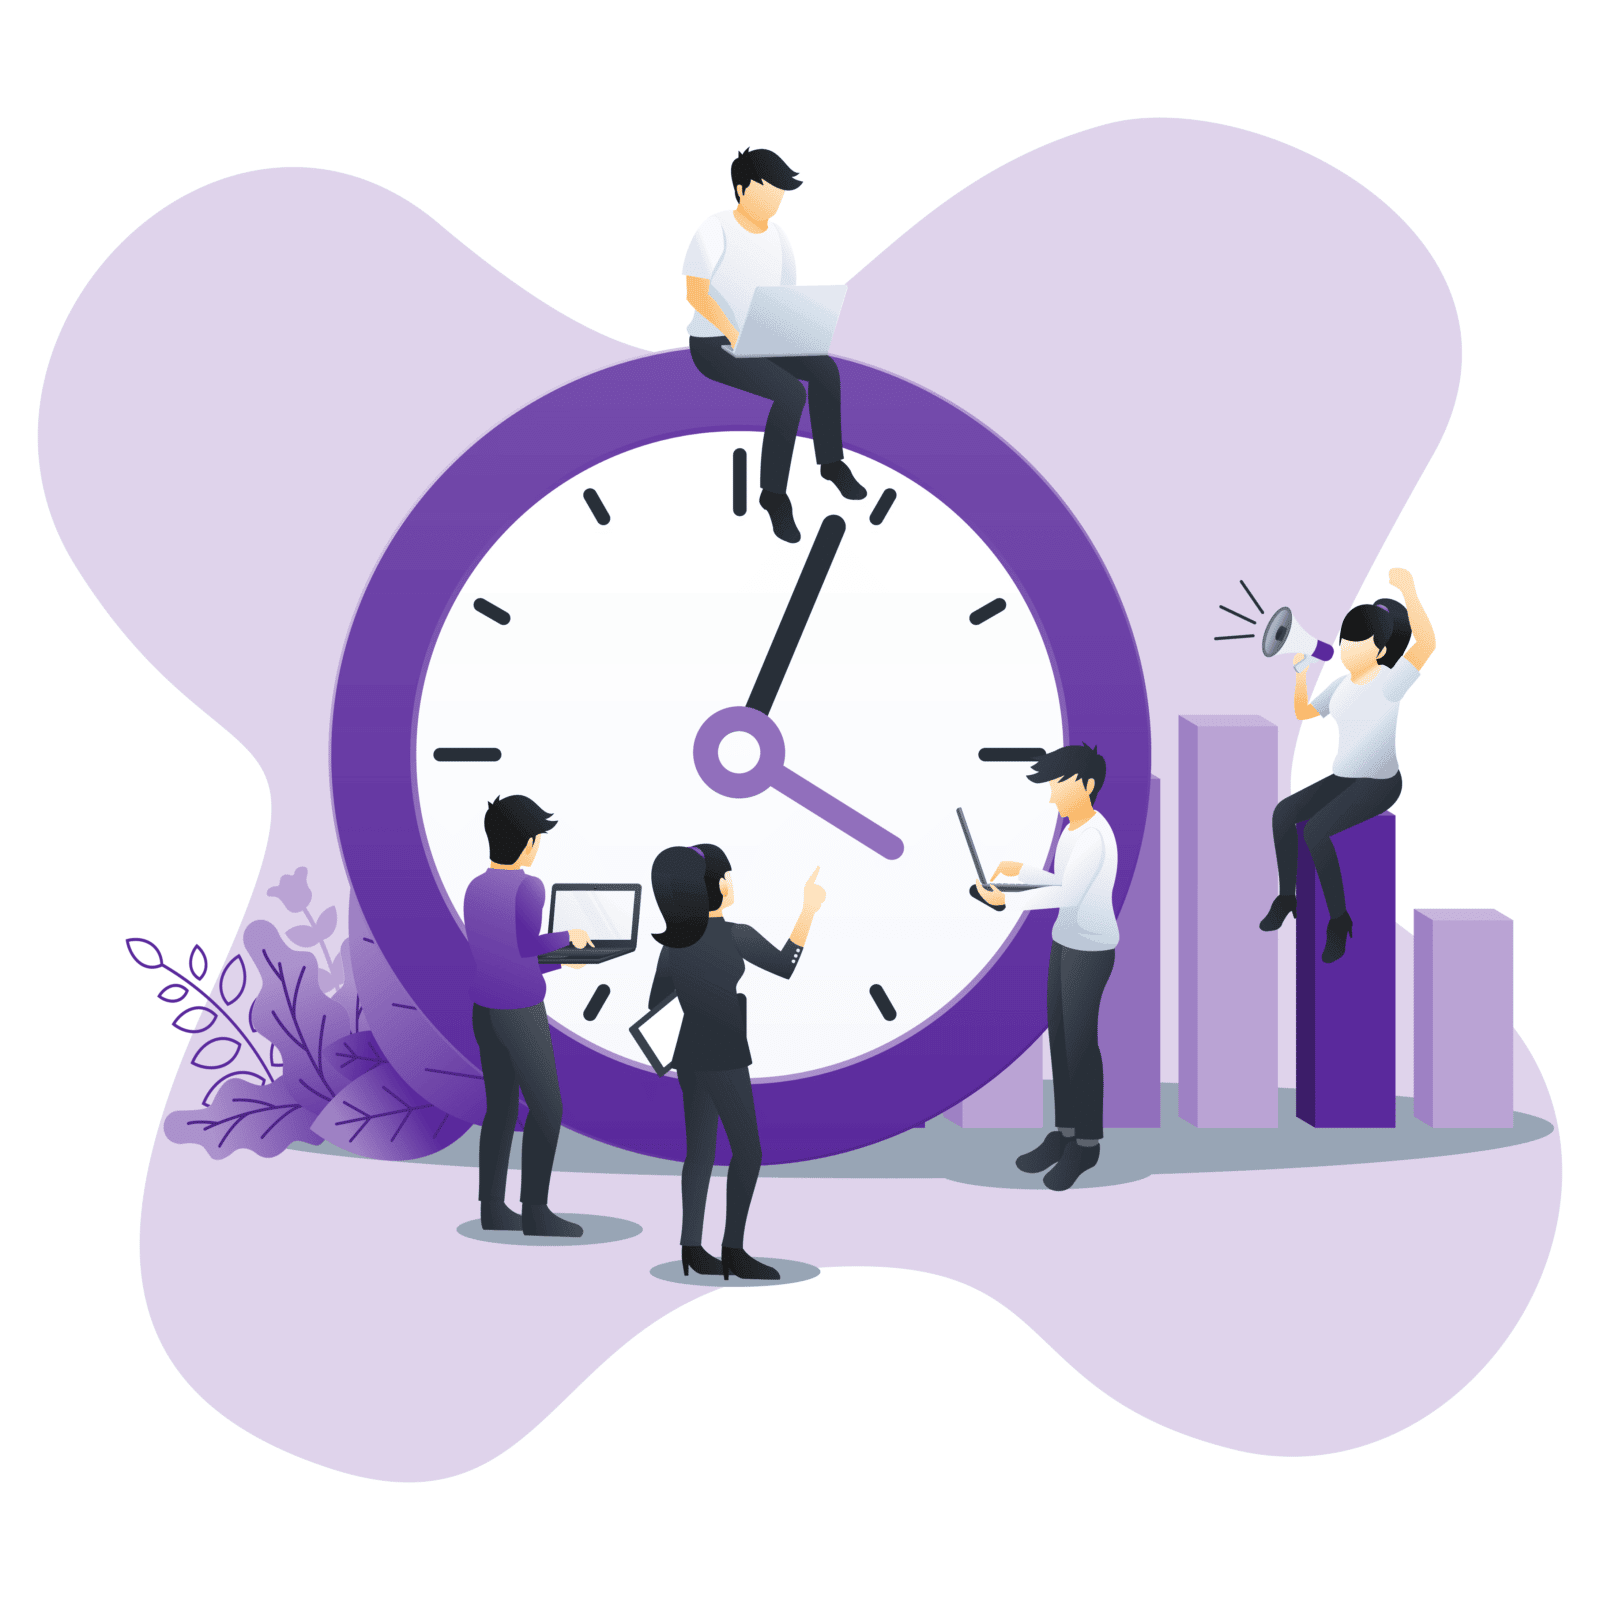 —Pngtree—time management concept with characters_5335951